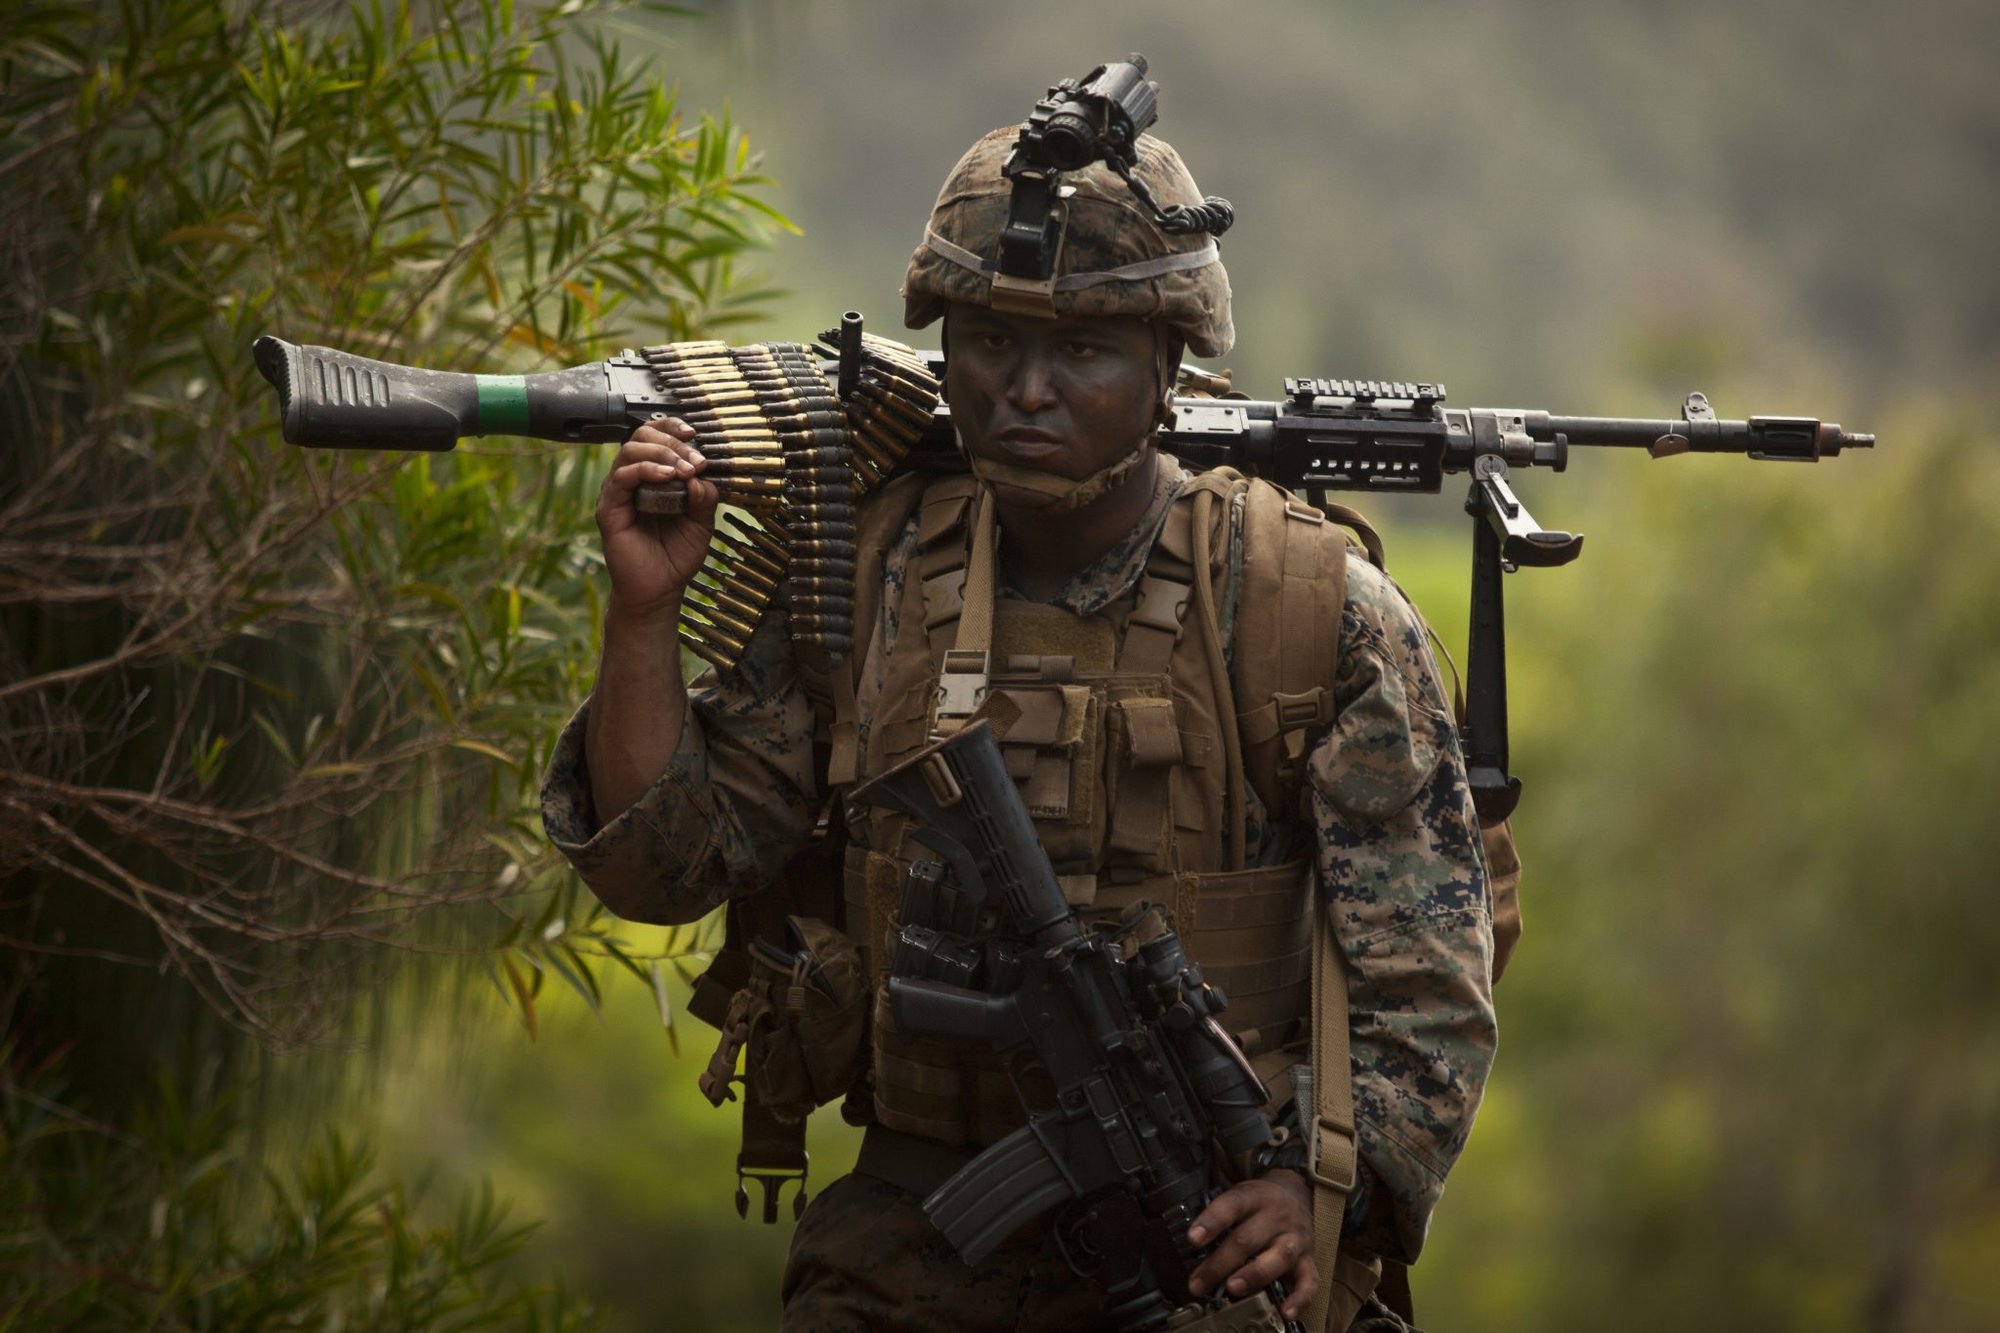 U.S. Marine Corps Lance Cpl. Jonathan Peguero, a team leader assigned to Fox Company, 2nd Battalion, 3rd Marine Regiment, carries M240G Medium Machine Gun during the Advanced Infantry Course (AIC) aboard Kahuku Training Area, Hawaii, July 18, 2016. AIC is intermediate training designed to enhance and test the Marine’s skills and leadership abilities as squad leaders in a rifle platoon. (U.S. Marine Corps Photo by Cpl. Aaron S. Patterson/Released)